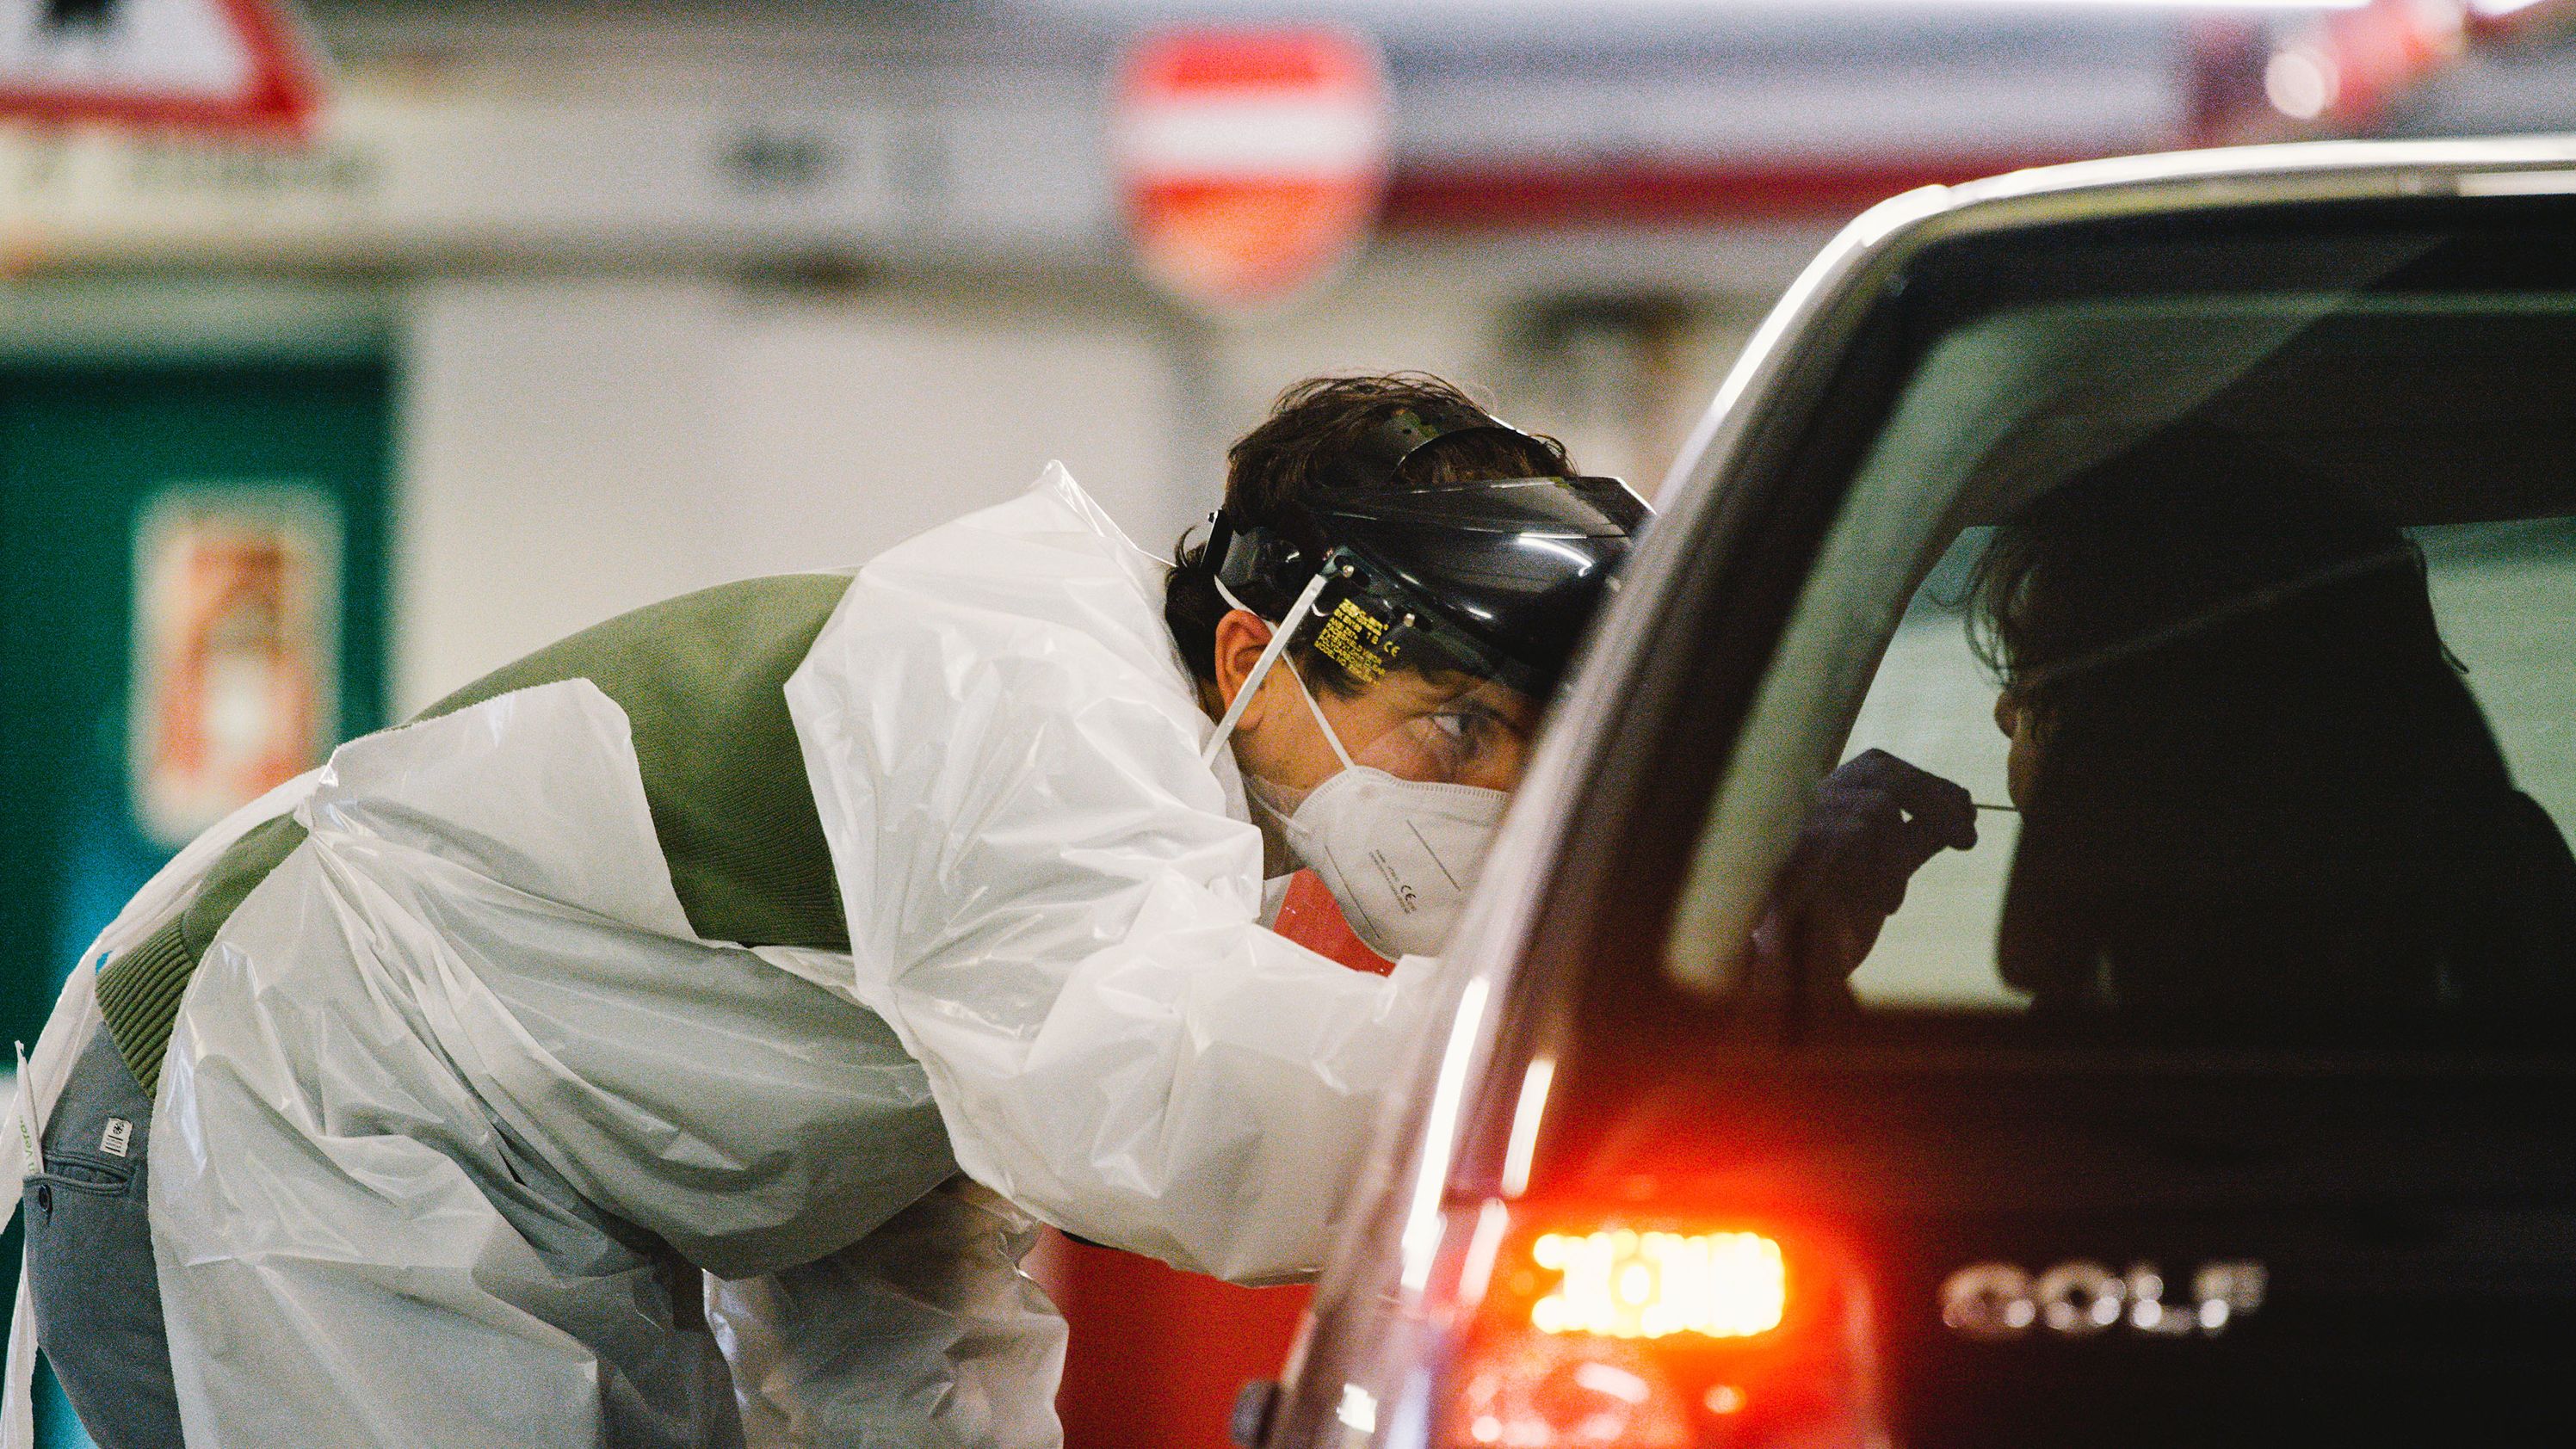 Medical workers administer antigen tests at Lanxess arena parking lot in Cologne, Germany, on December 14. 